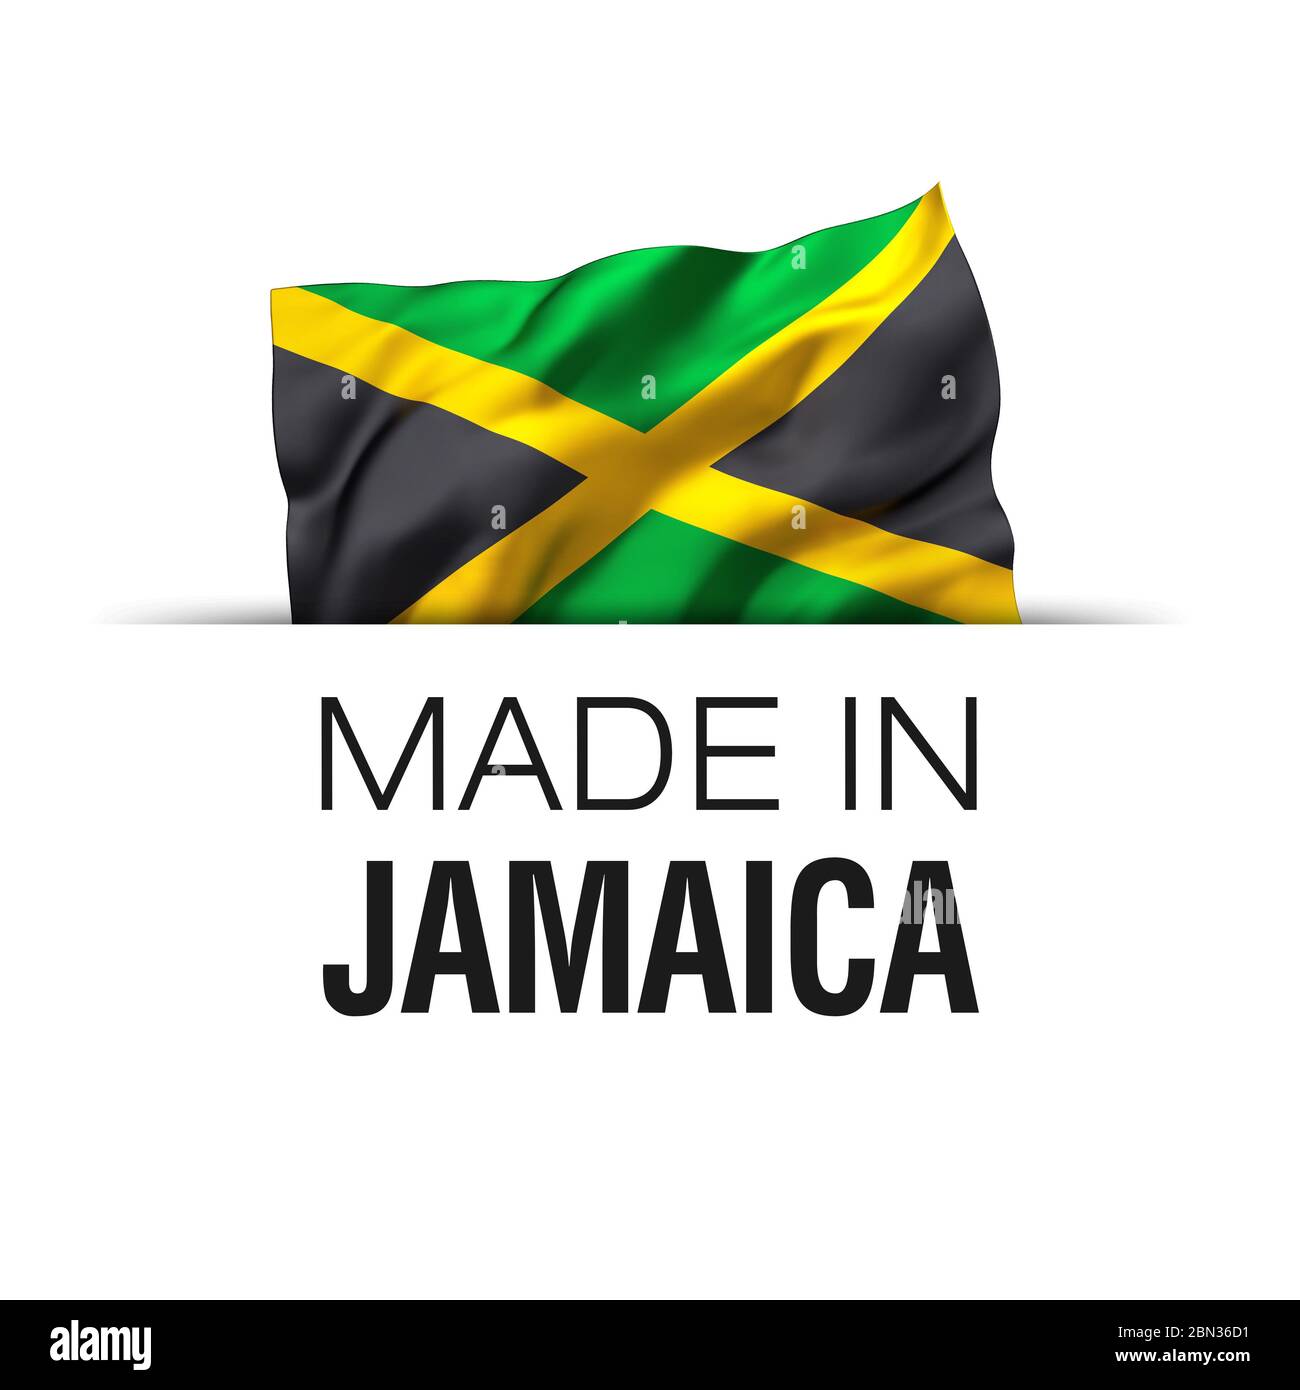 Made in Jamaica - Guarantee label with a waving Jamaican flag. 3D illustration. Stock Photo